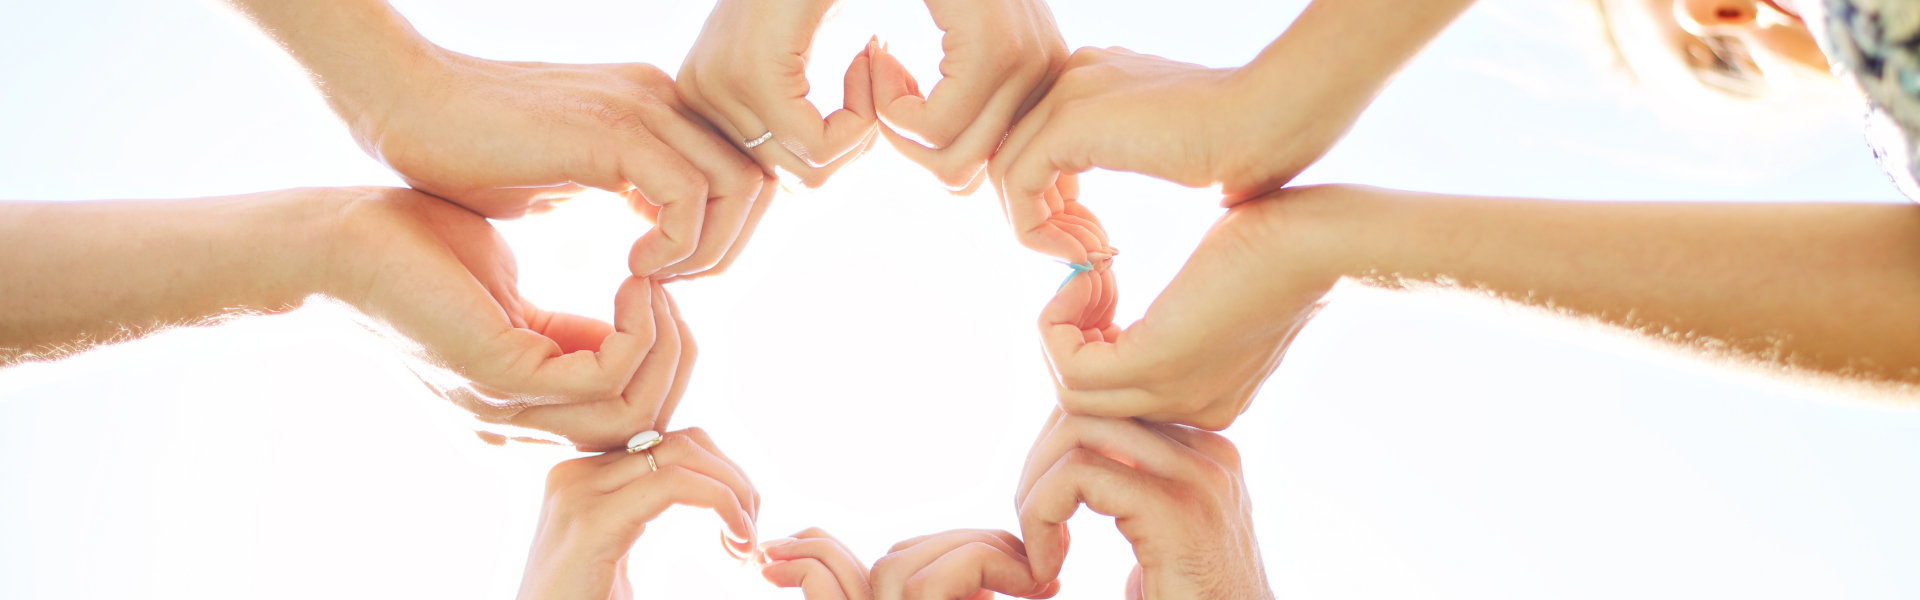 group of hands forming a heart